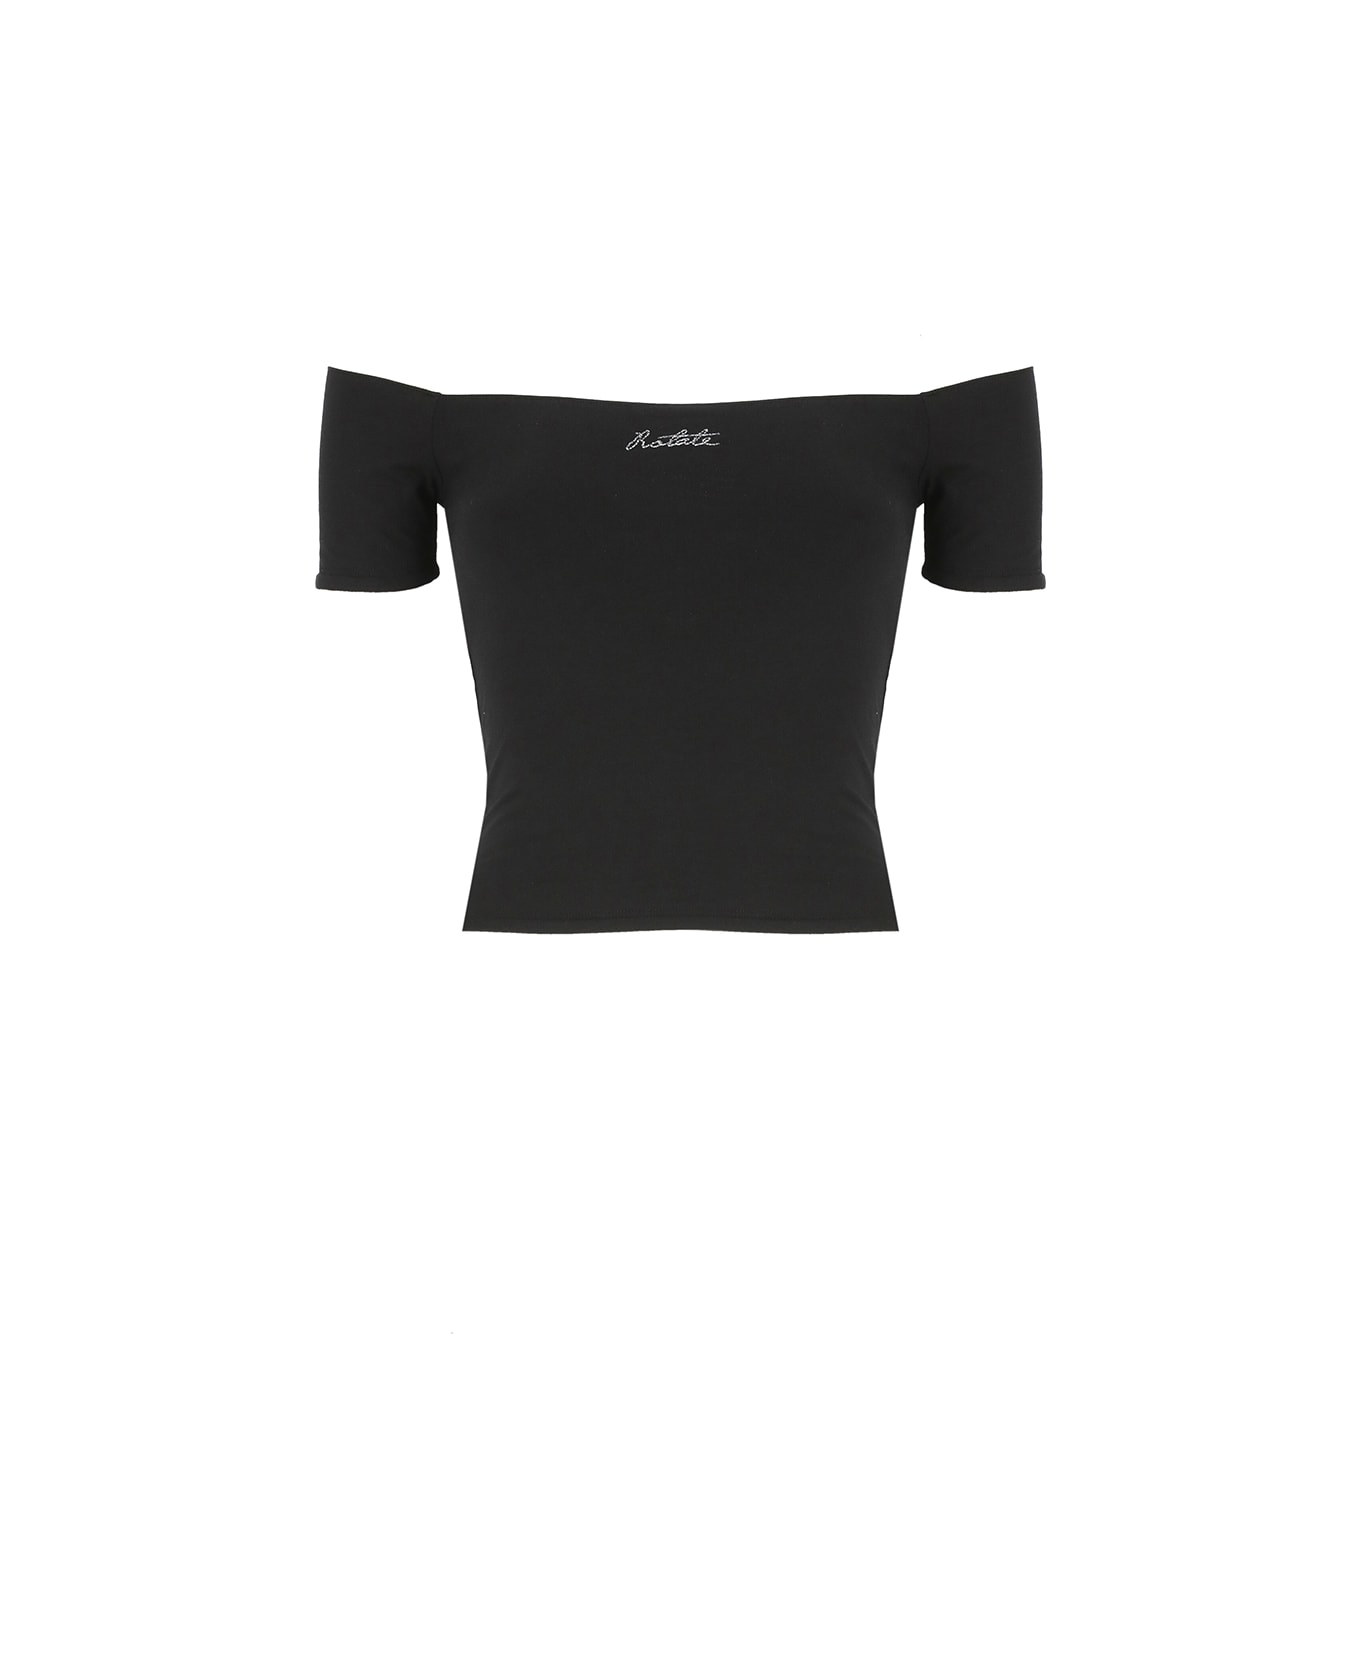 Rotate by Birger Christensen 'logo Off' Cotton And Modal Top - Black